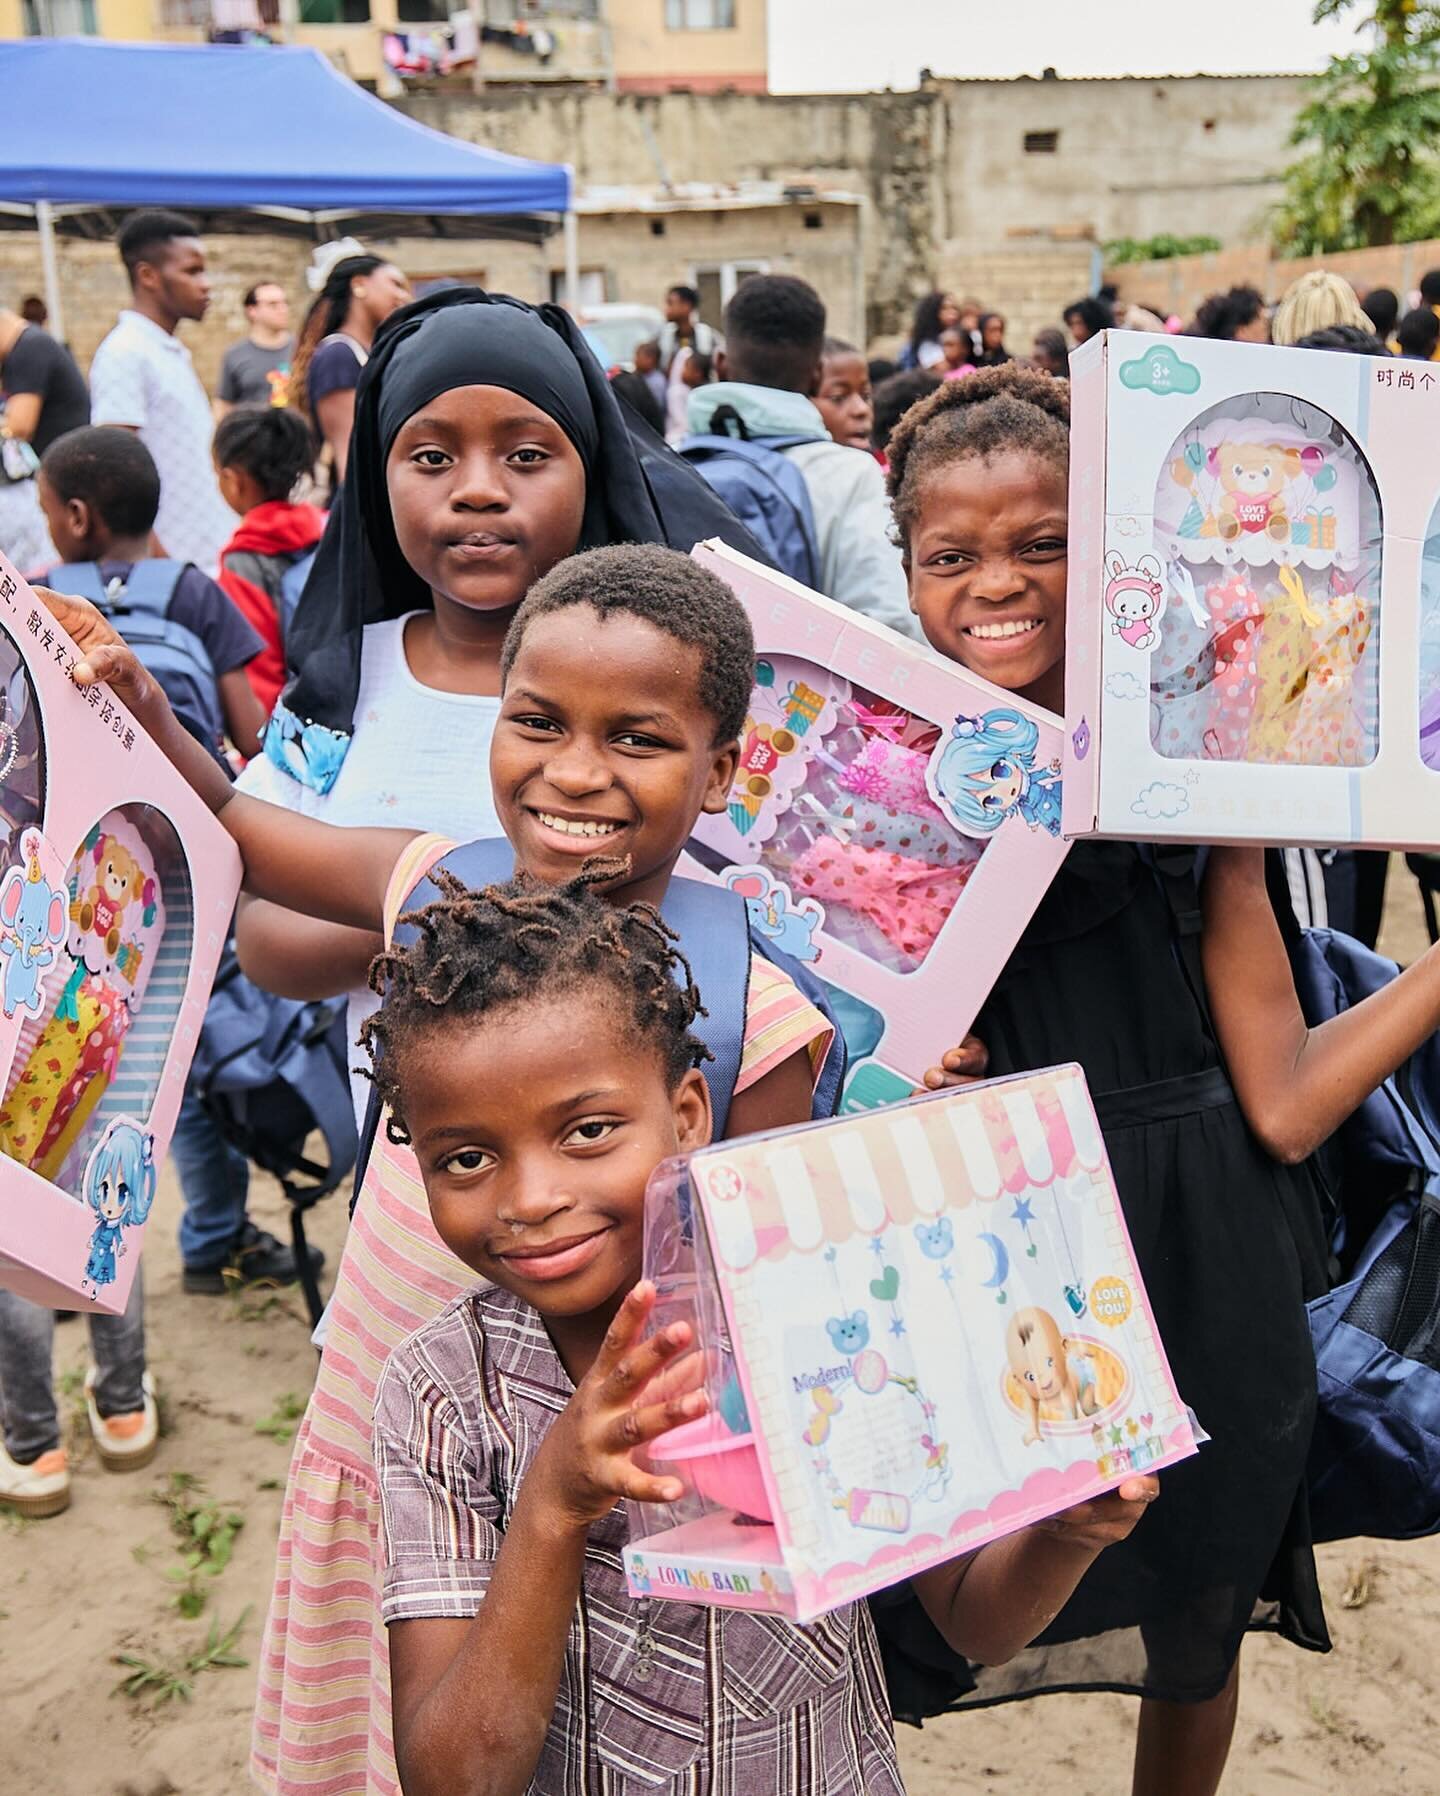 We are really grateful with the nonprofit organization Toys for Ecuador @toysforecuador who traveled with us to Mozambique, Africa 🇲🇿 and provided brand new toys to 1,500 underprivileged children, In the vast majority of cases, it was the first tim